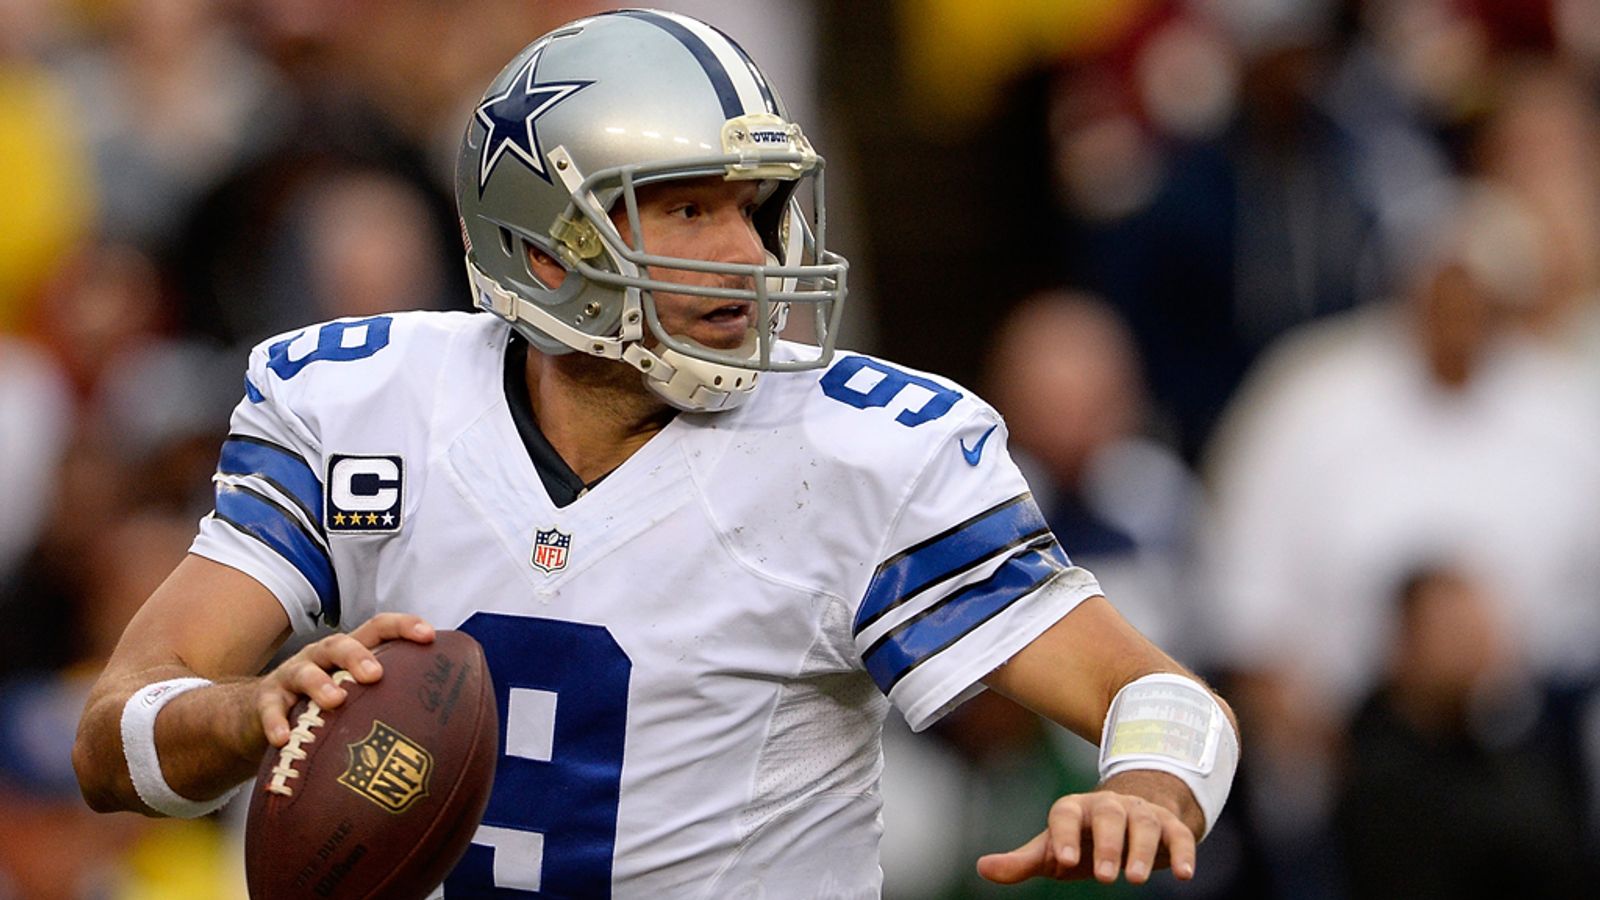 Tony Romo puts in a ridiculous amount of time working on his golf game